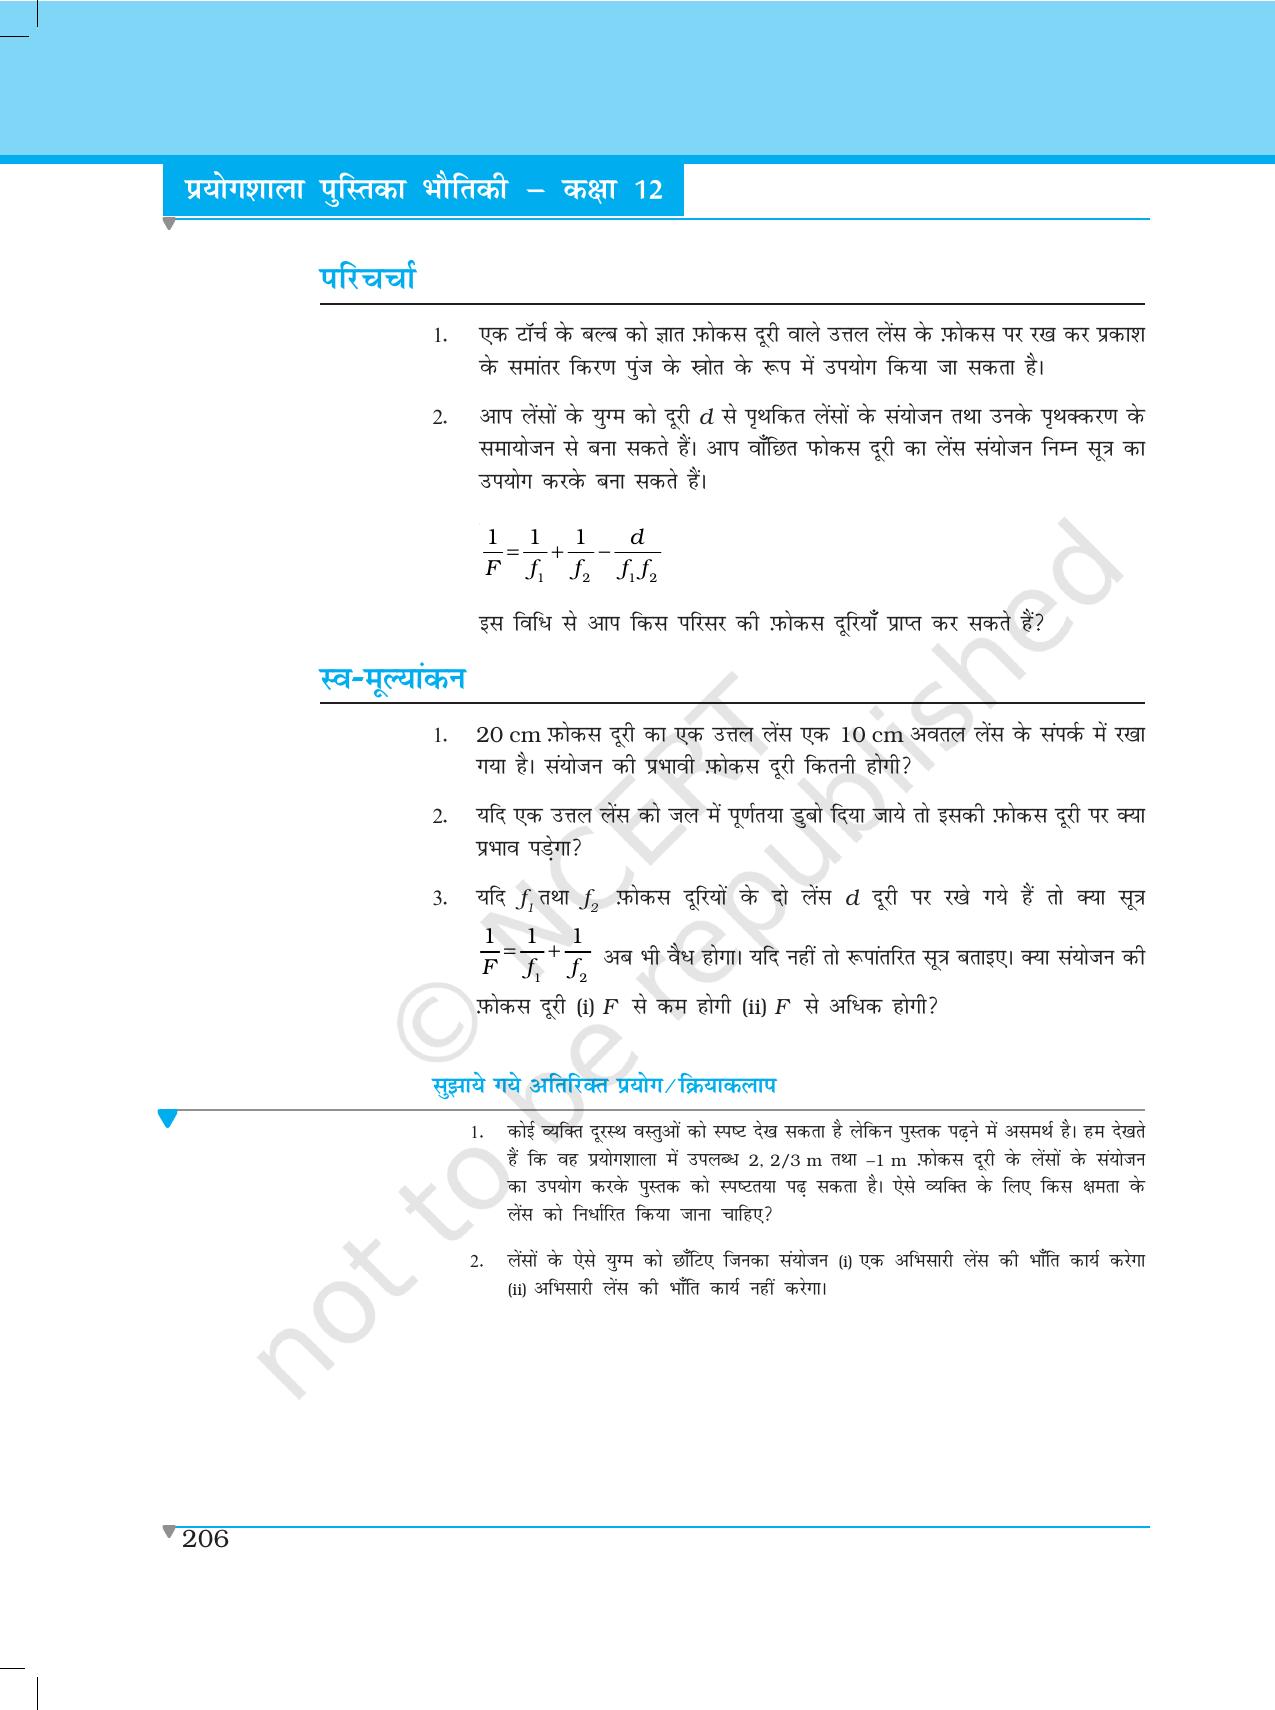 NCERT Laboratory Manuals for Class XII भौतिकी - क्रियाकलाप (12 - 14) - Page 17